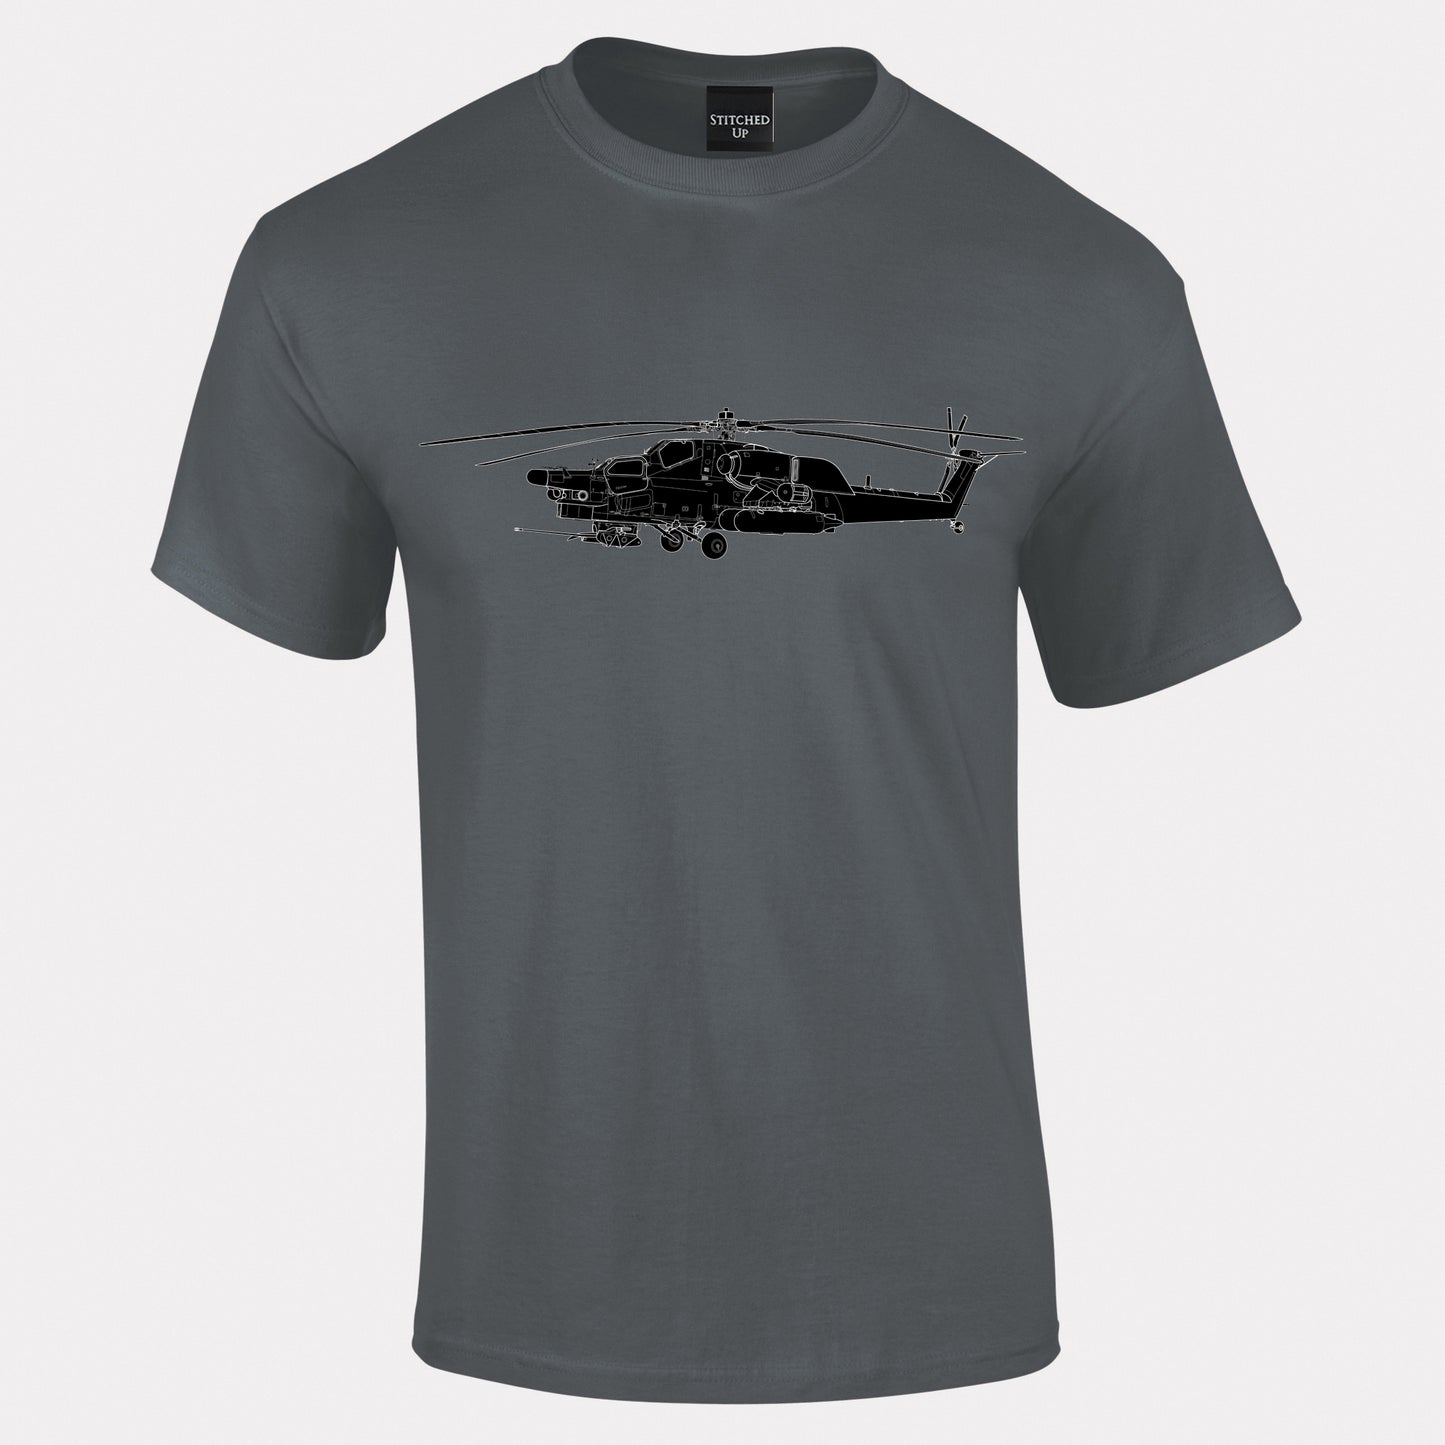 Mi-28 Havoc Military Helicopter T-Shirt